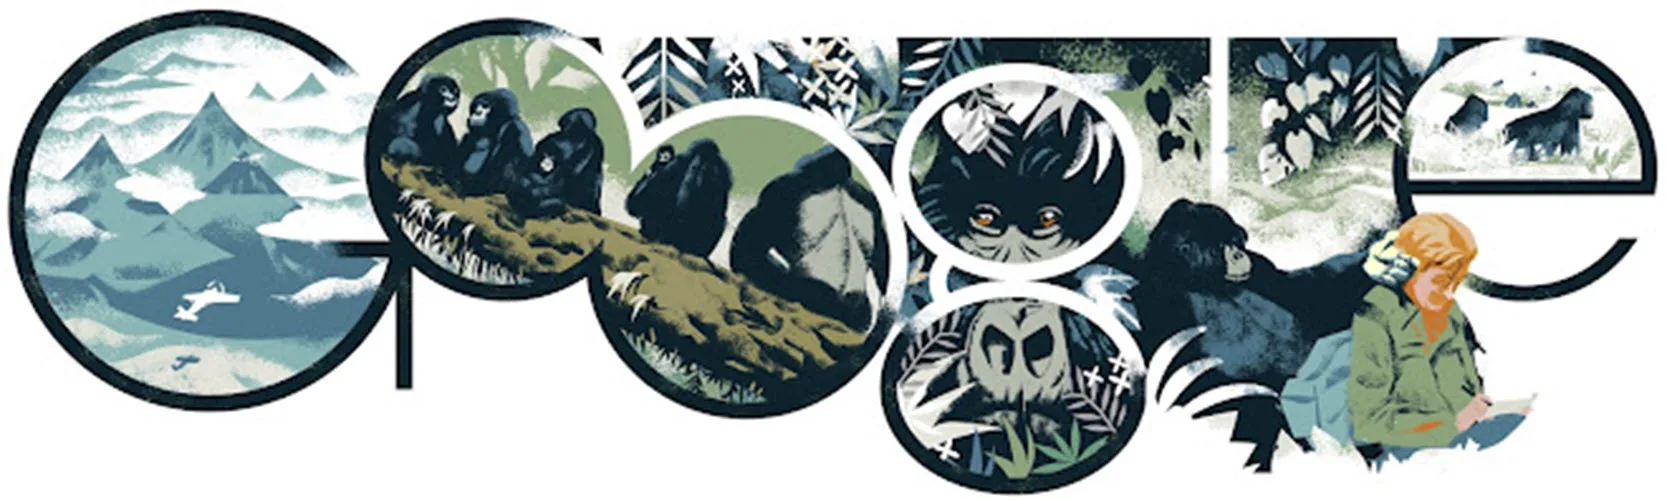 16 January: Remembering Dian Fossey on Birthday